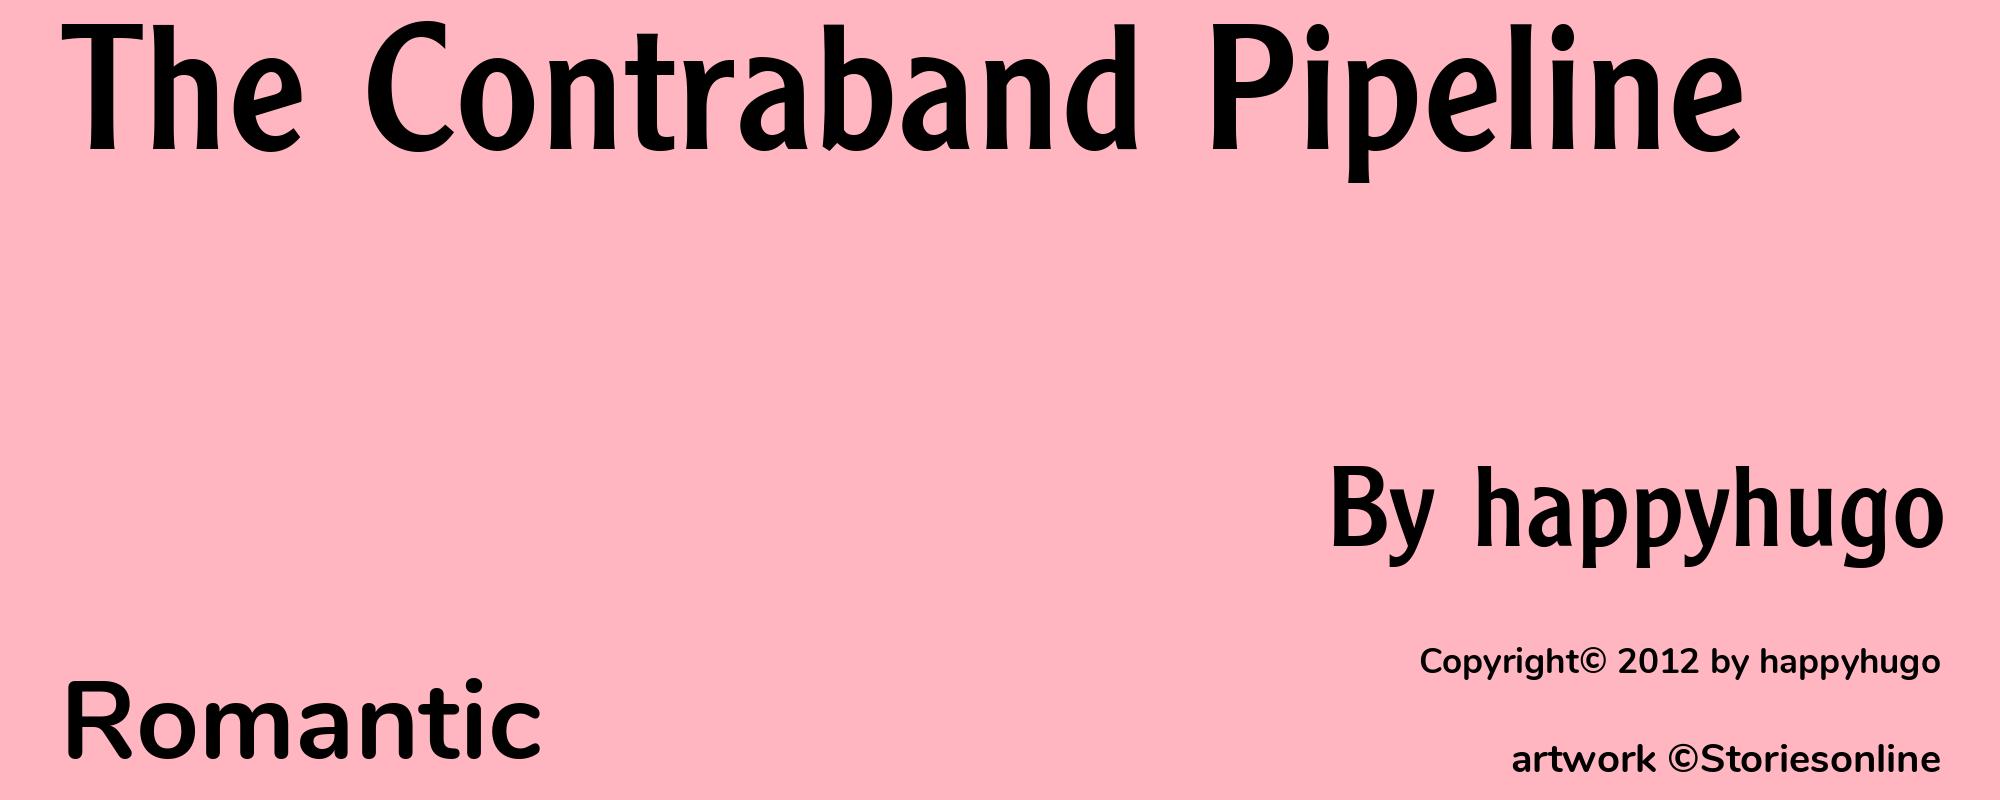 The Contraband Pipeline - Cover